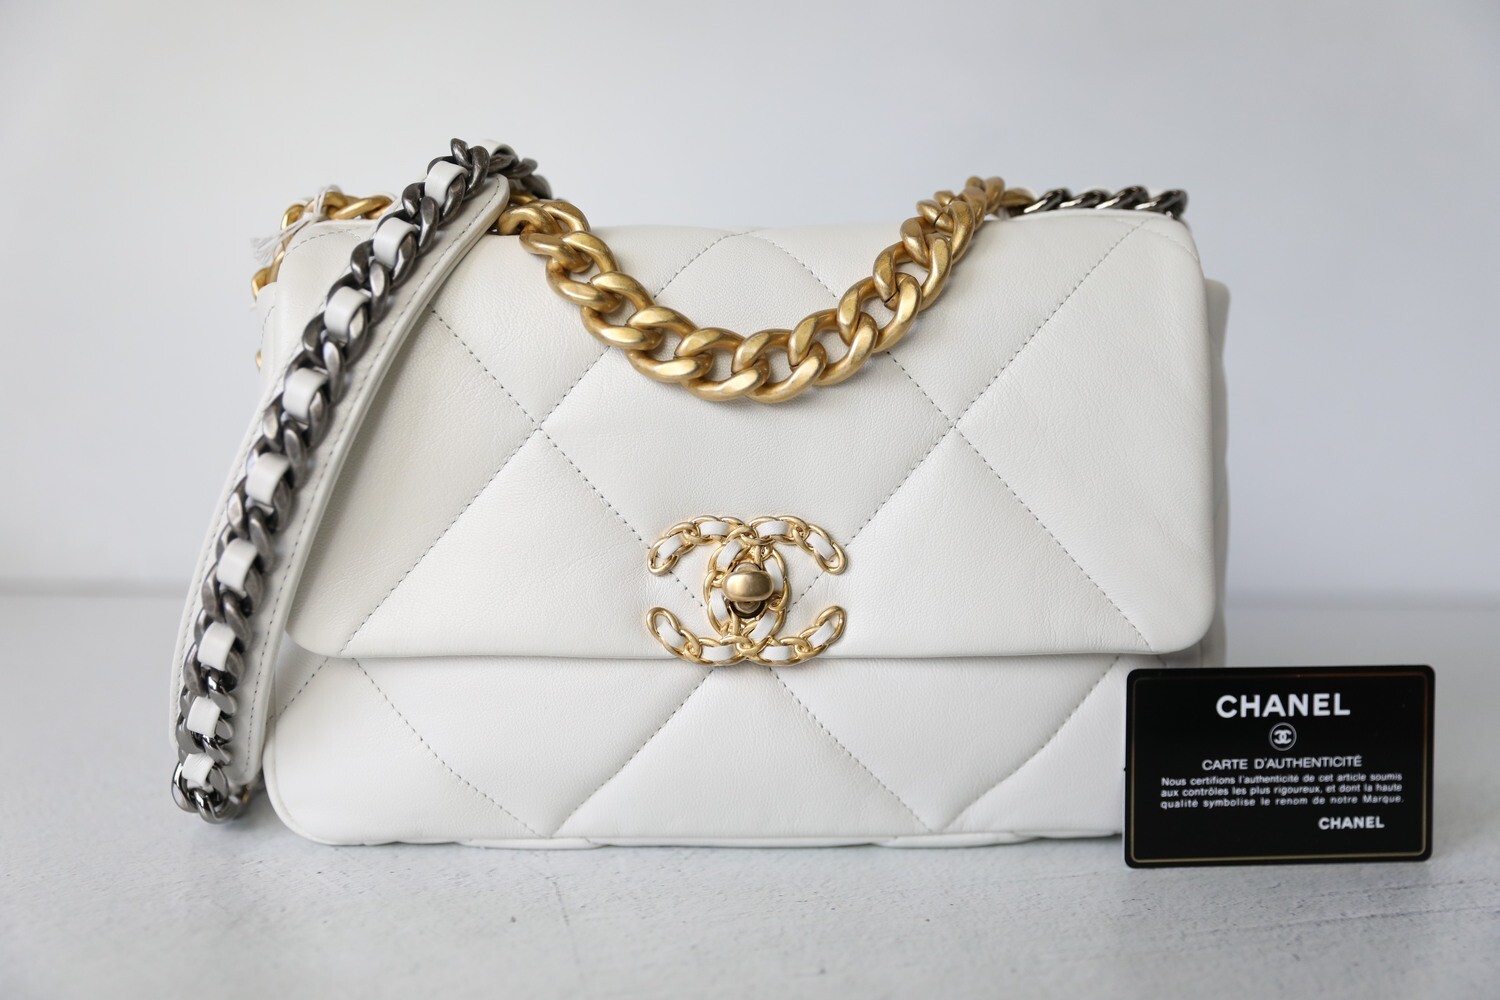 Chanel 19 Small, White Leather with Mixed Tone Hardware, New in Box WA001